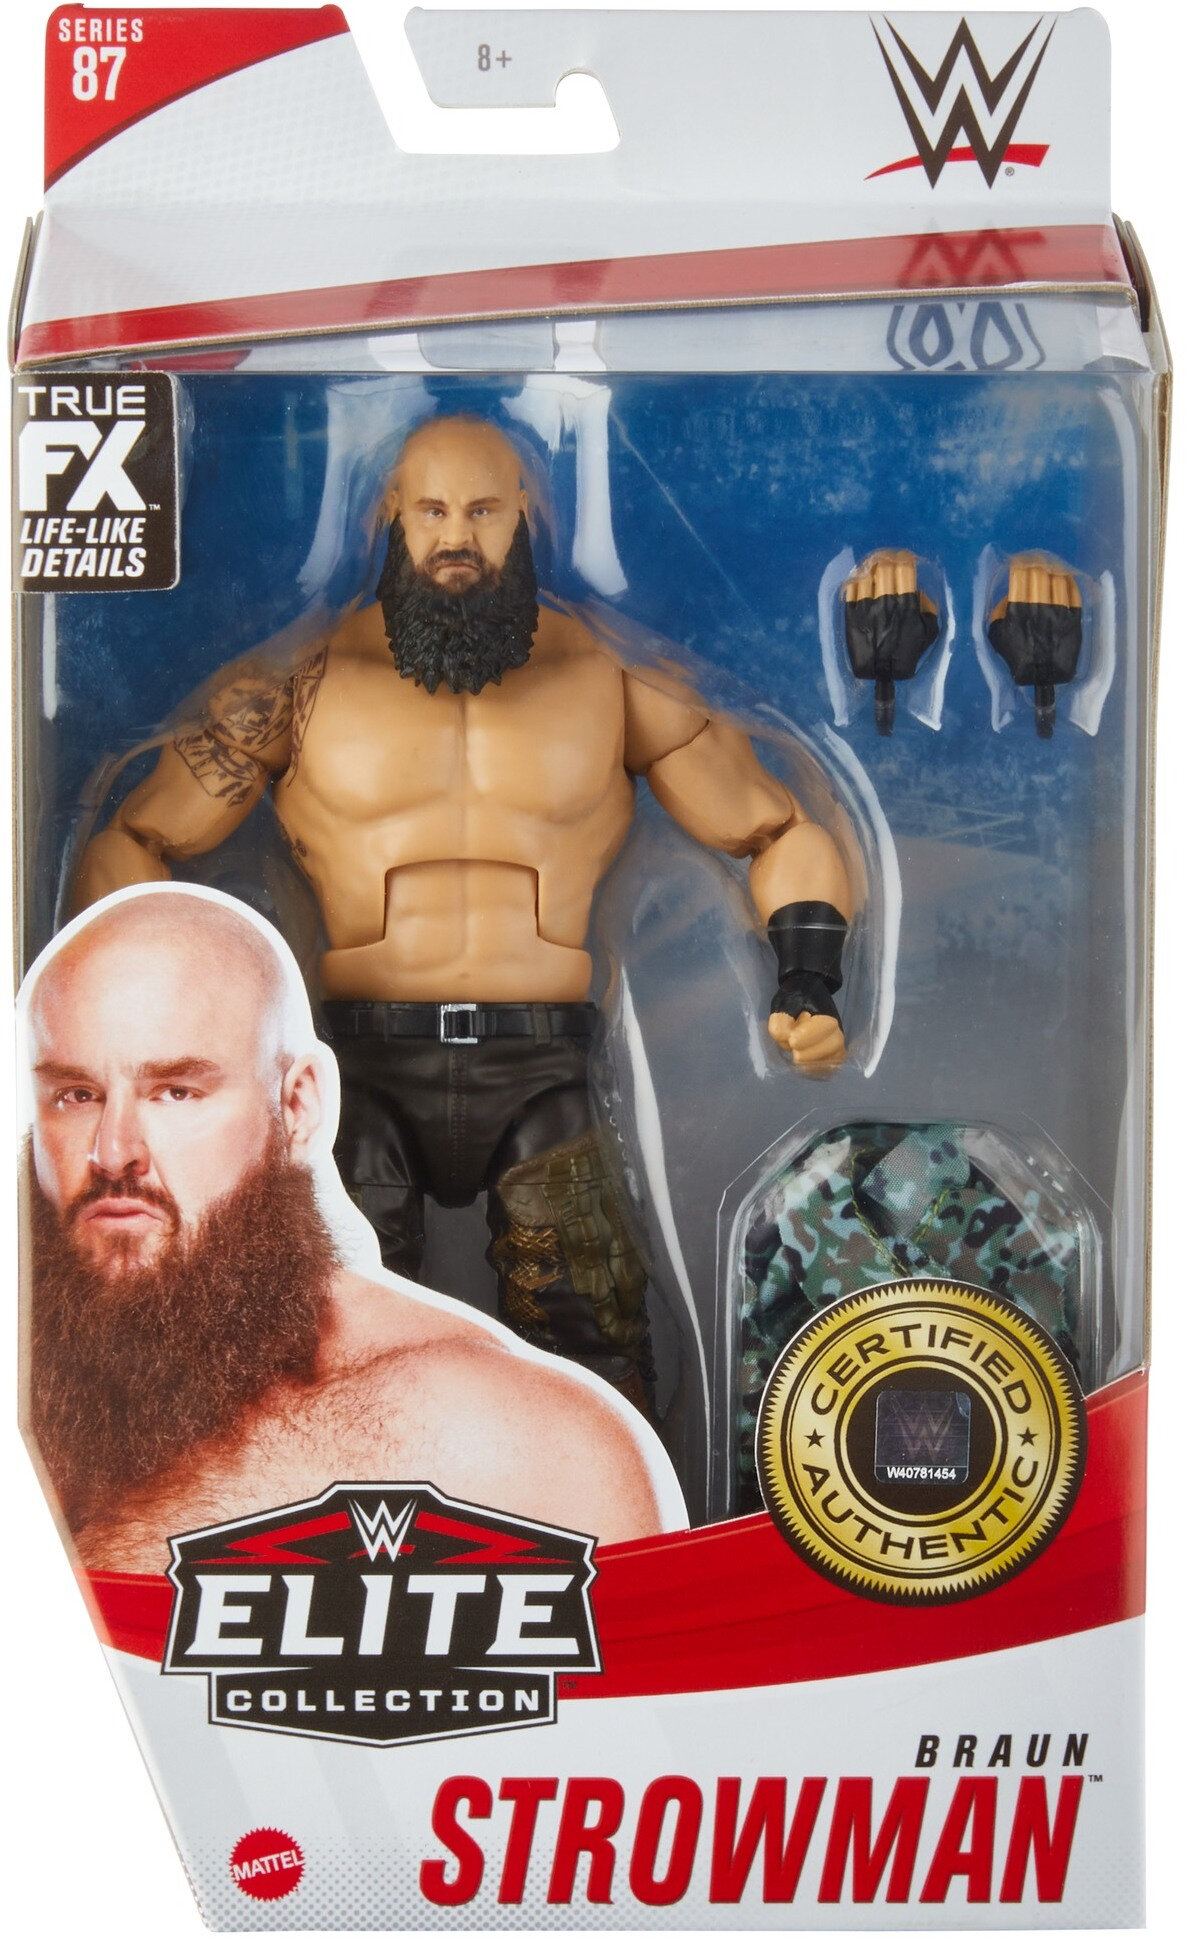 WWE Braun Strowman Elite Collection Action Figure, 6-in Posable Collectible - image 2 of 2